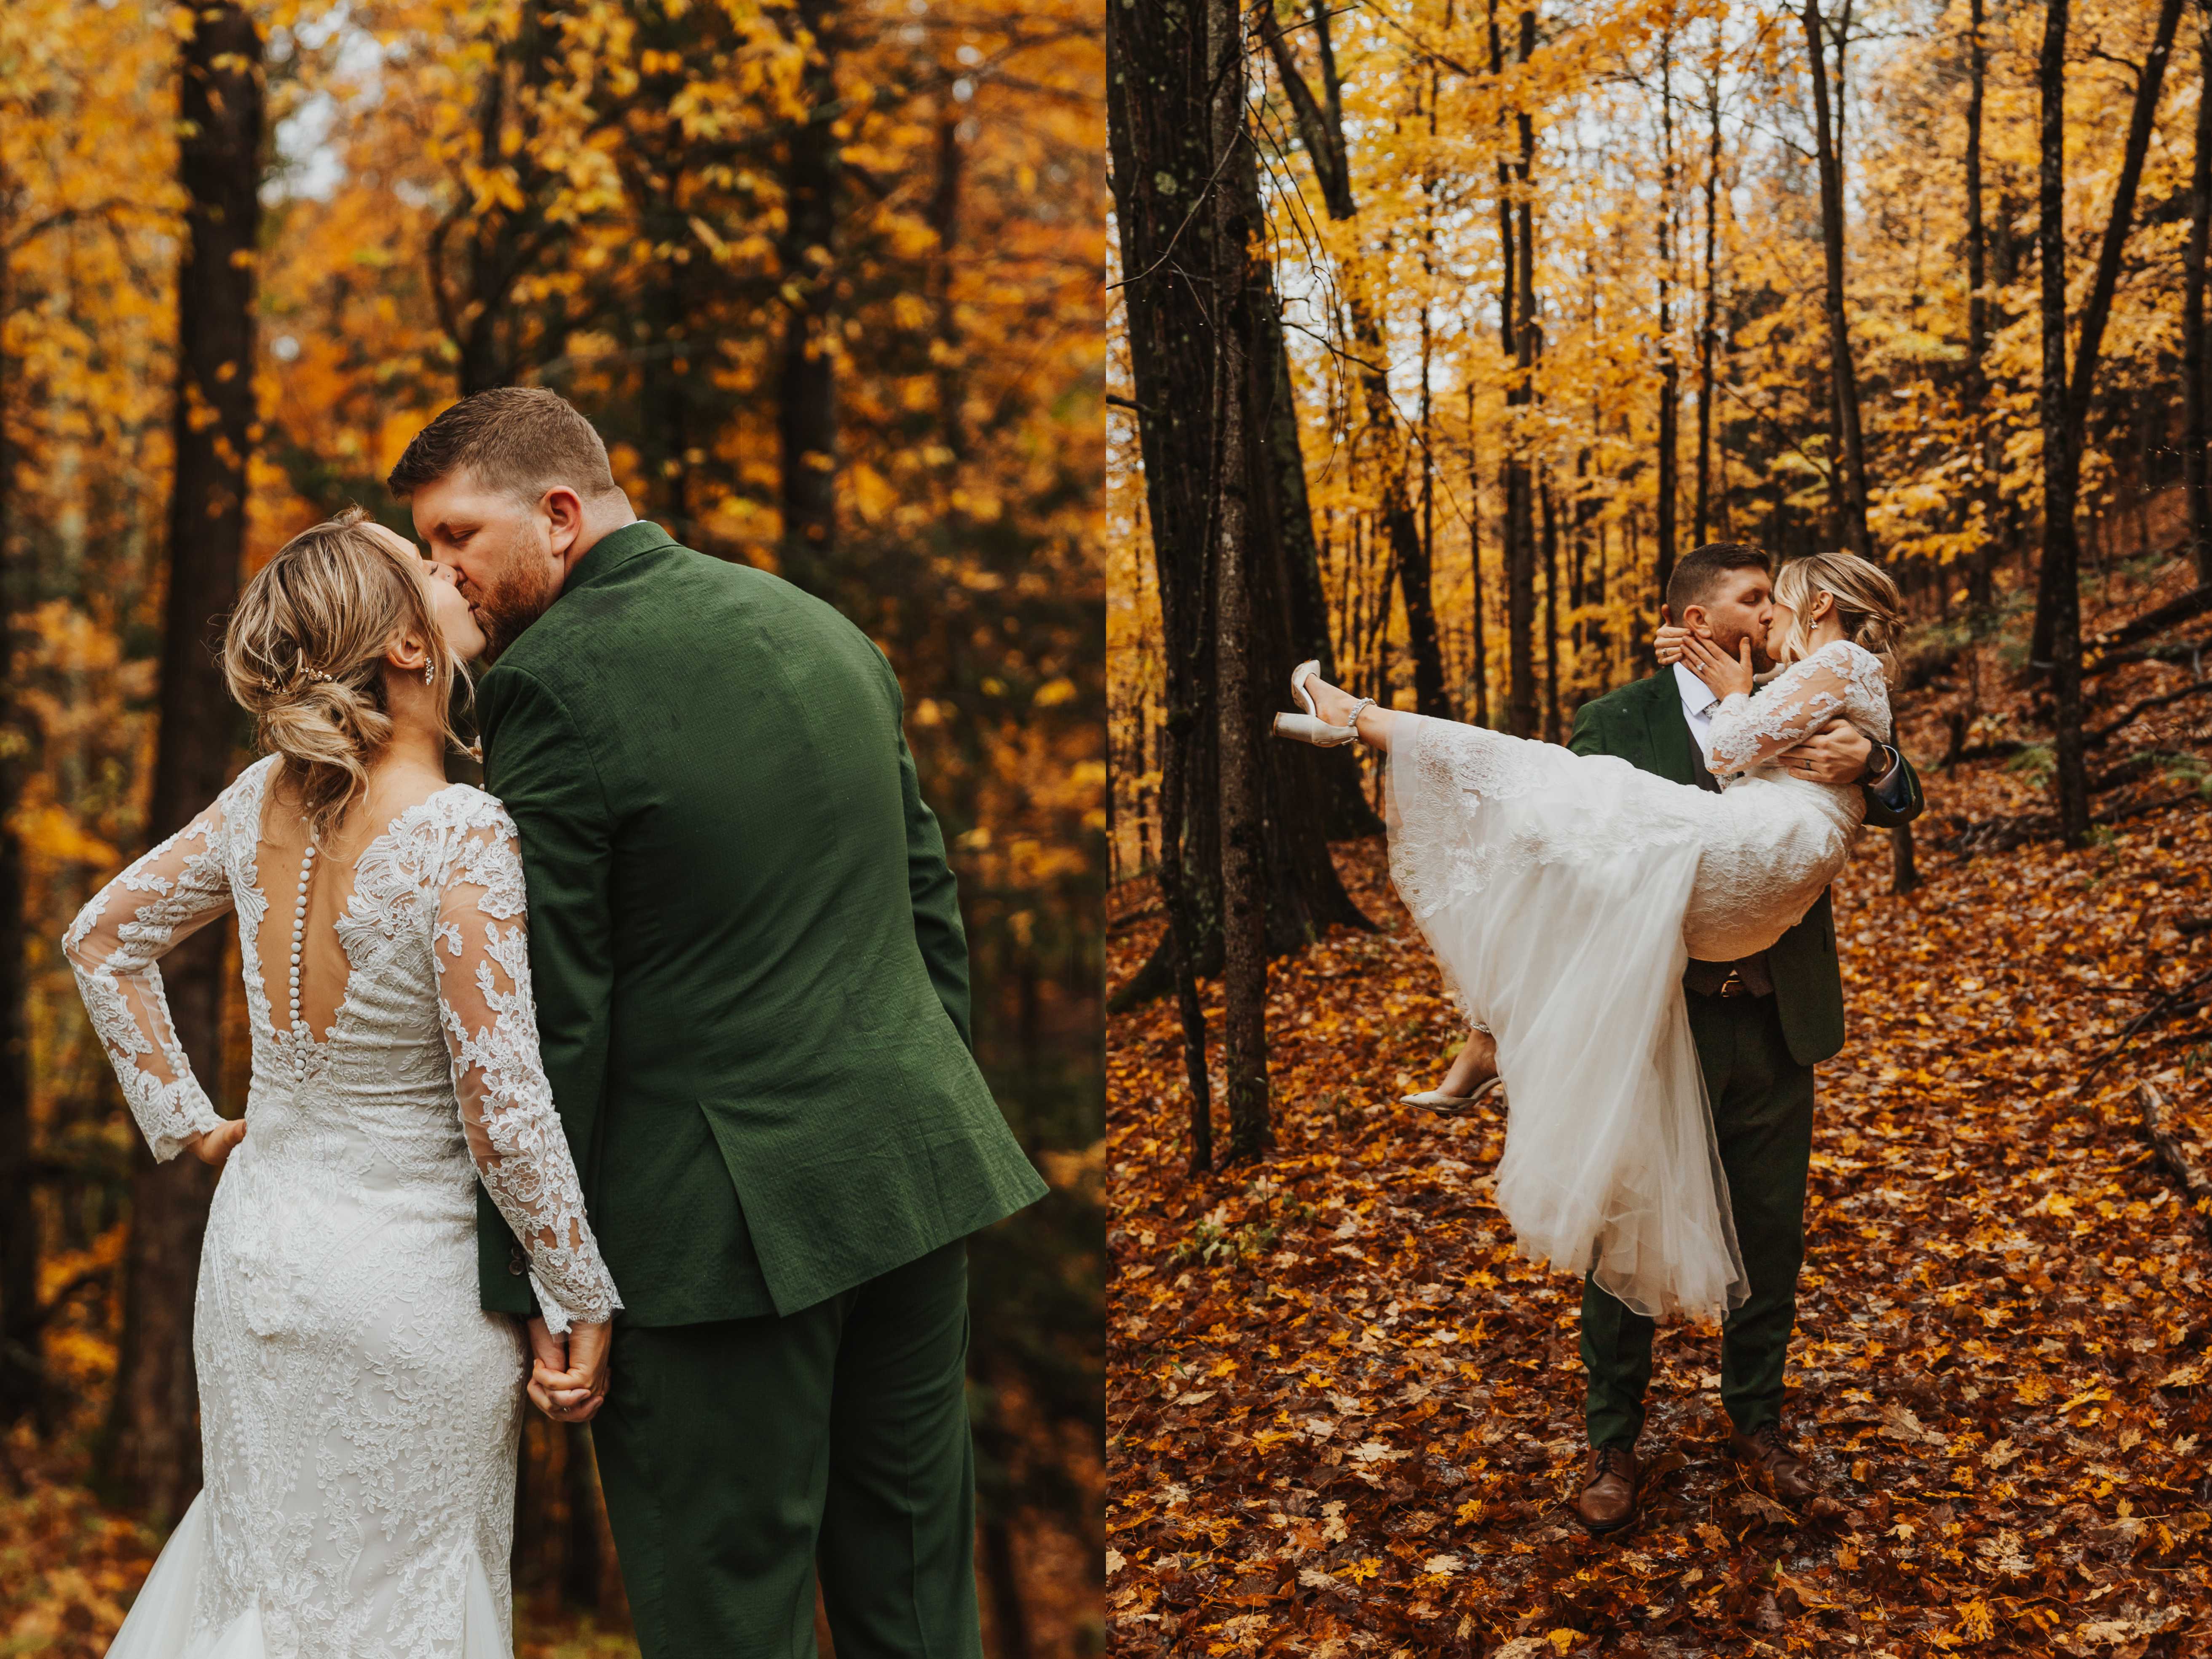 2 photos side by side of a bride and groom in a forest where all the leaves are yellow, the left photo is of them kissing and holding hands, the right is of them kissing while the groom holds the bride in his arms